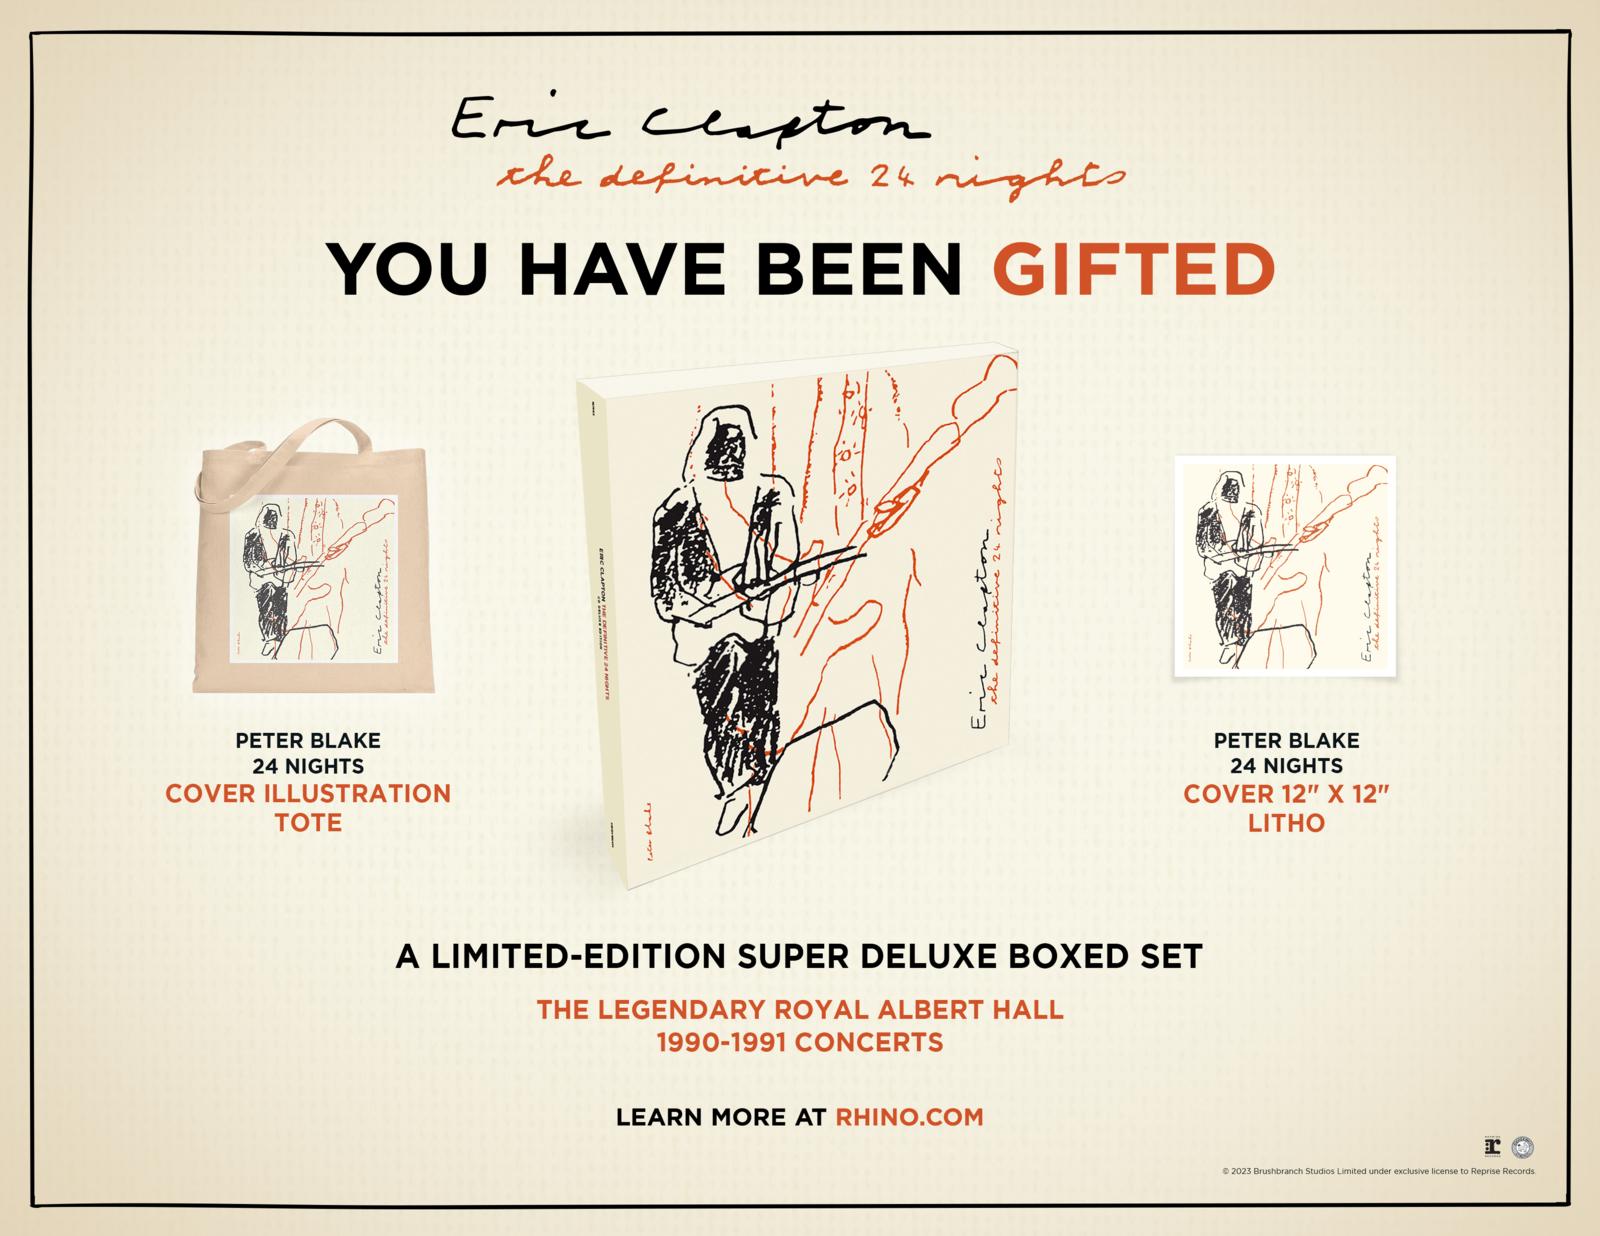 Eric Clapton Gift with Purchase